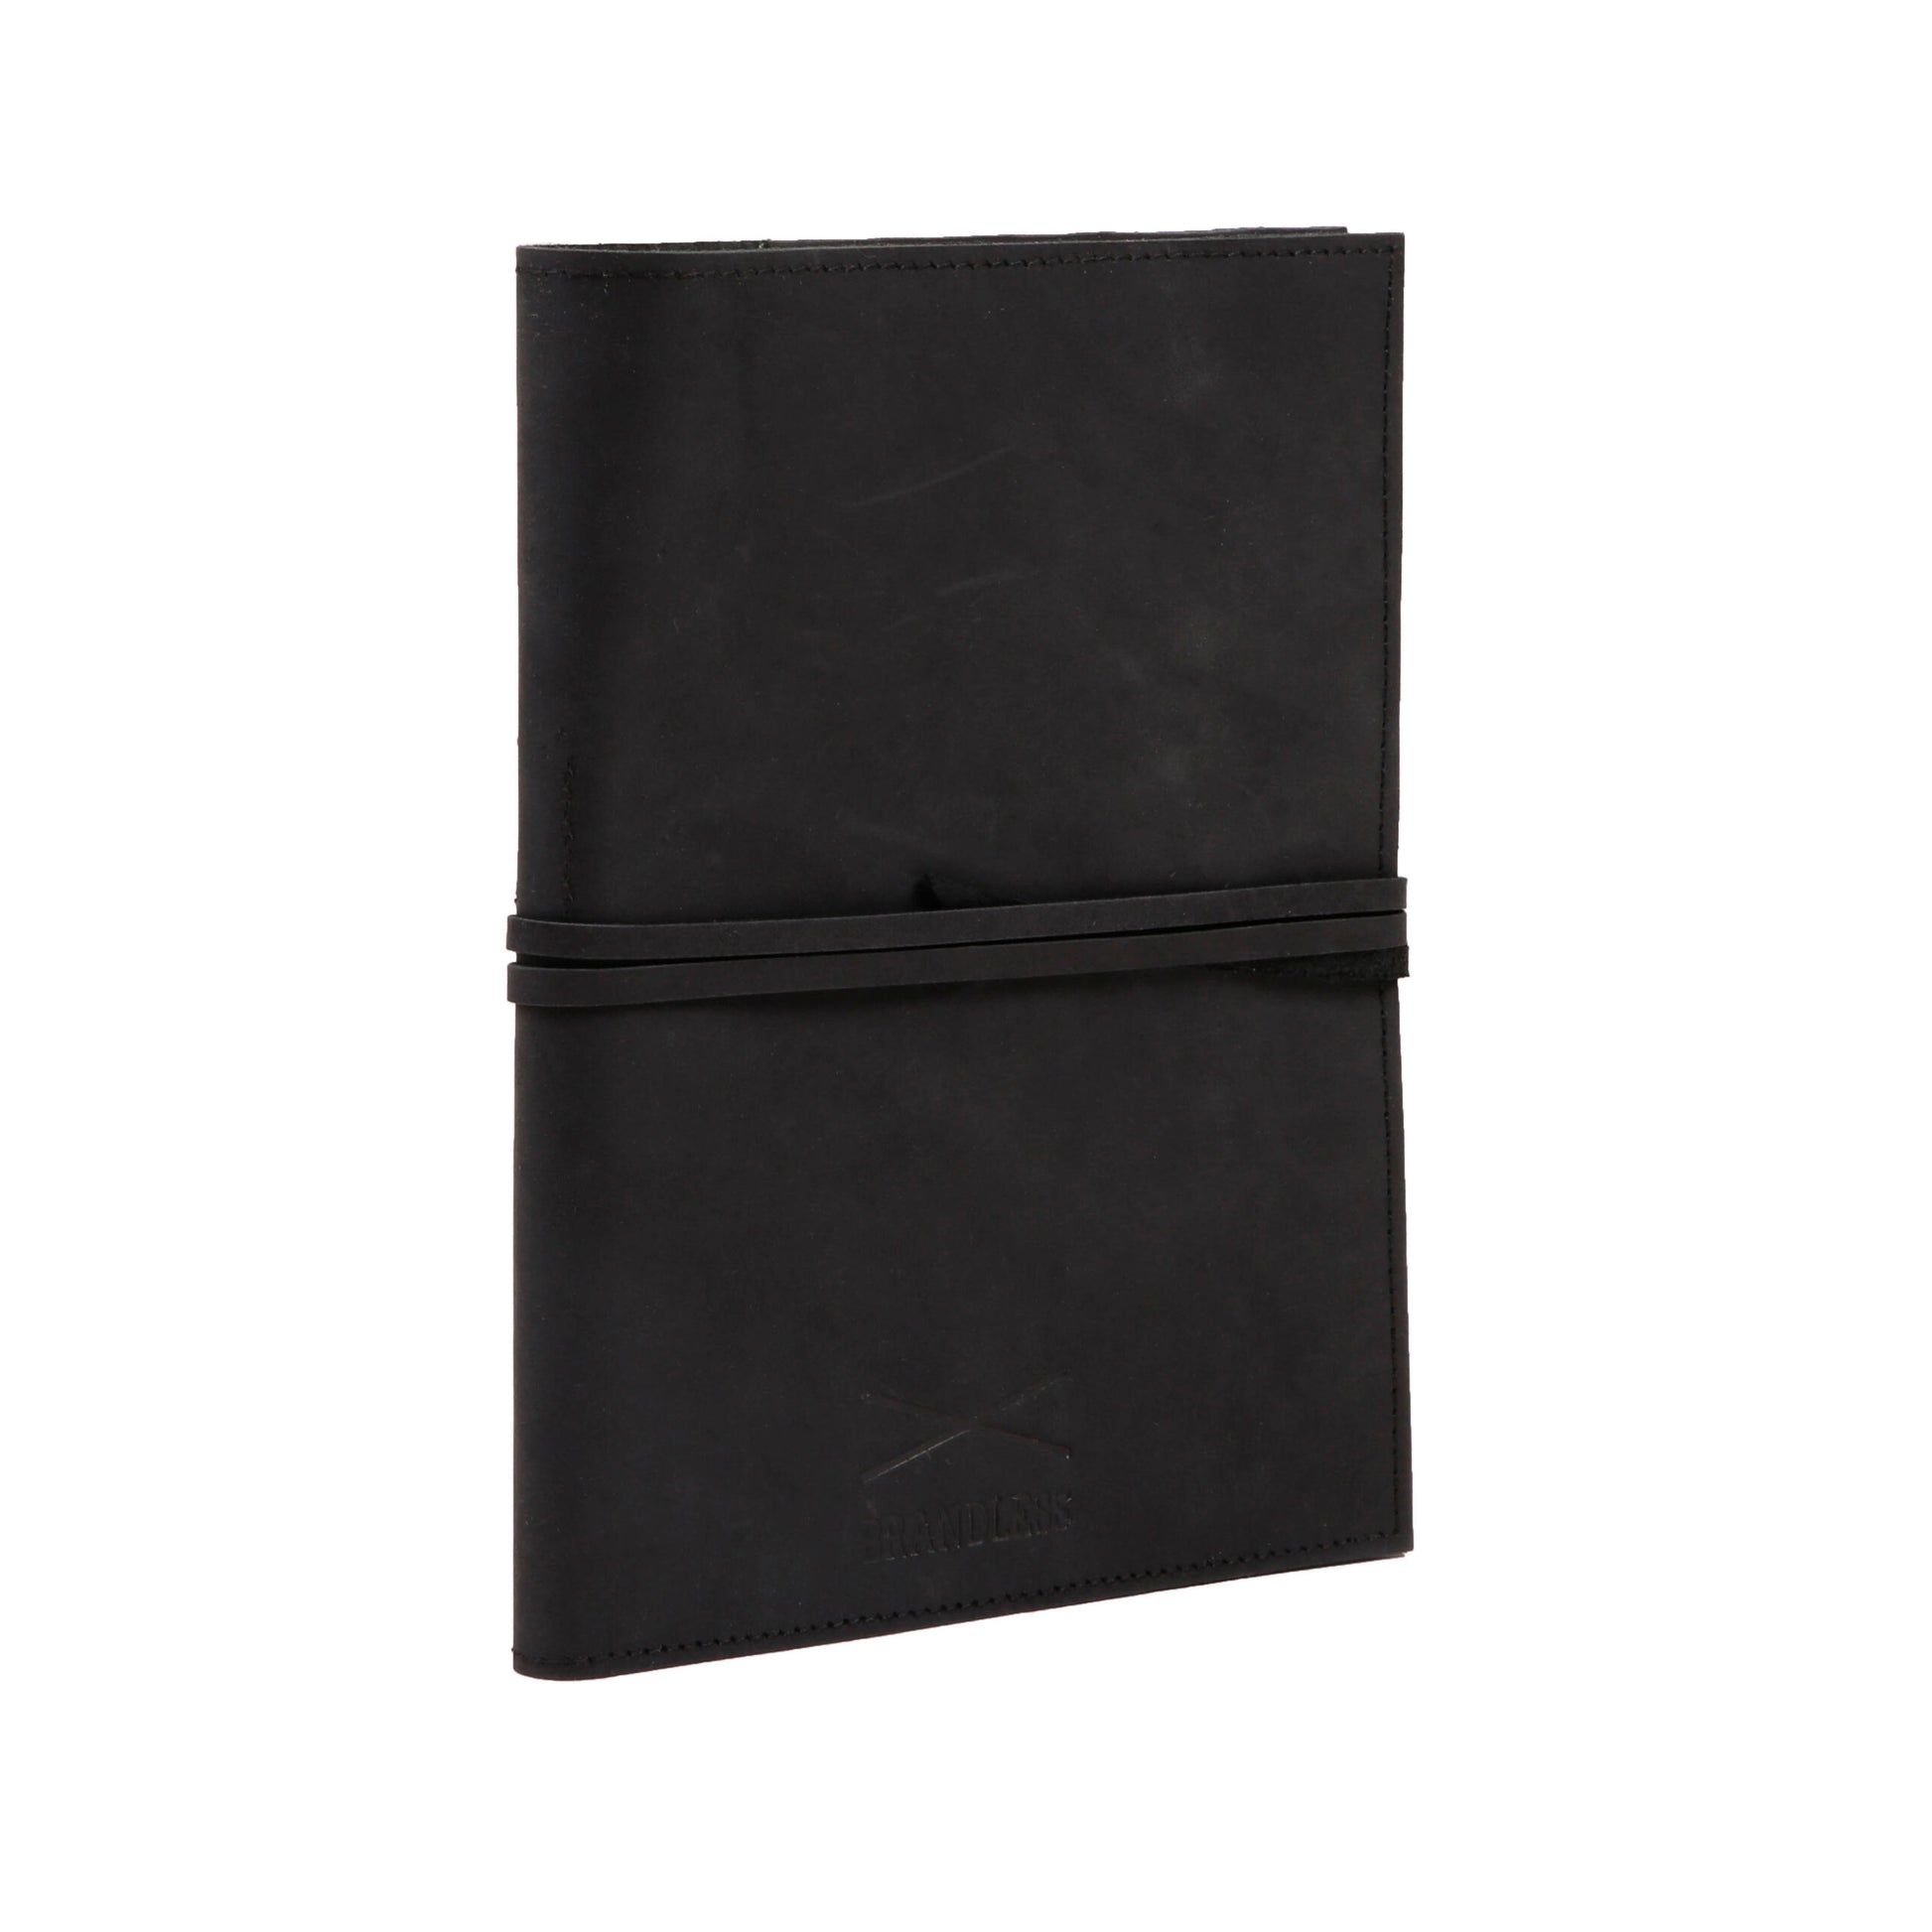 LEATHER JOURNAL STATIONERY NOTEBOOK HANDCRAFTED NOTEBOOK